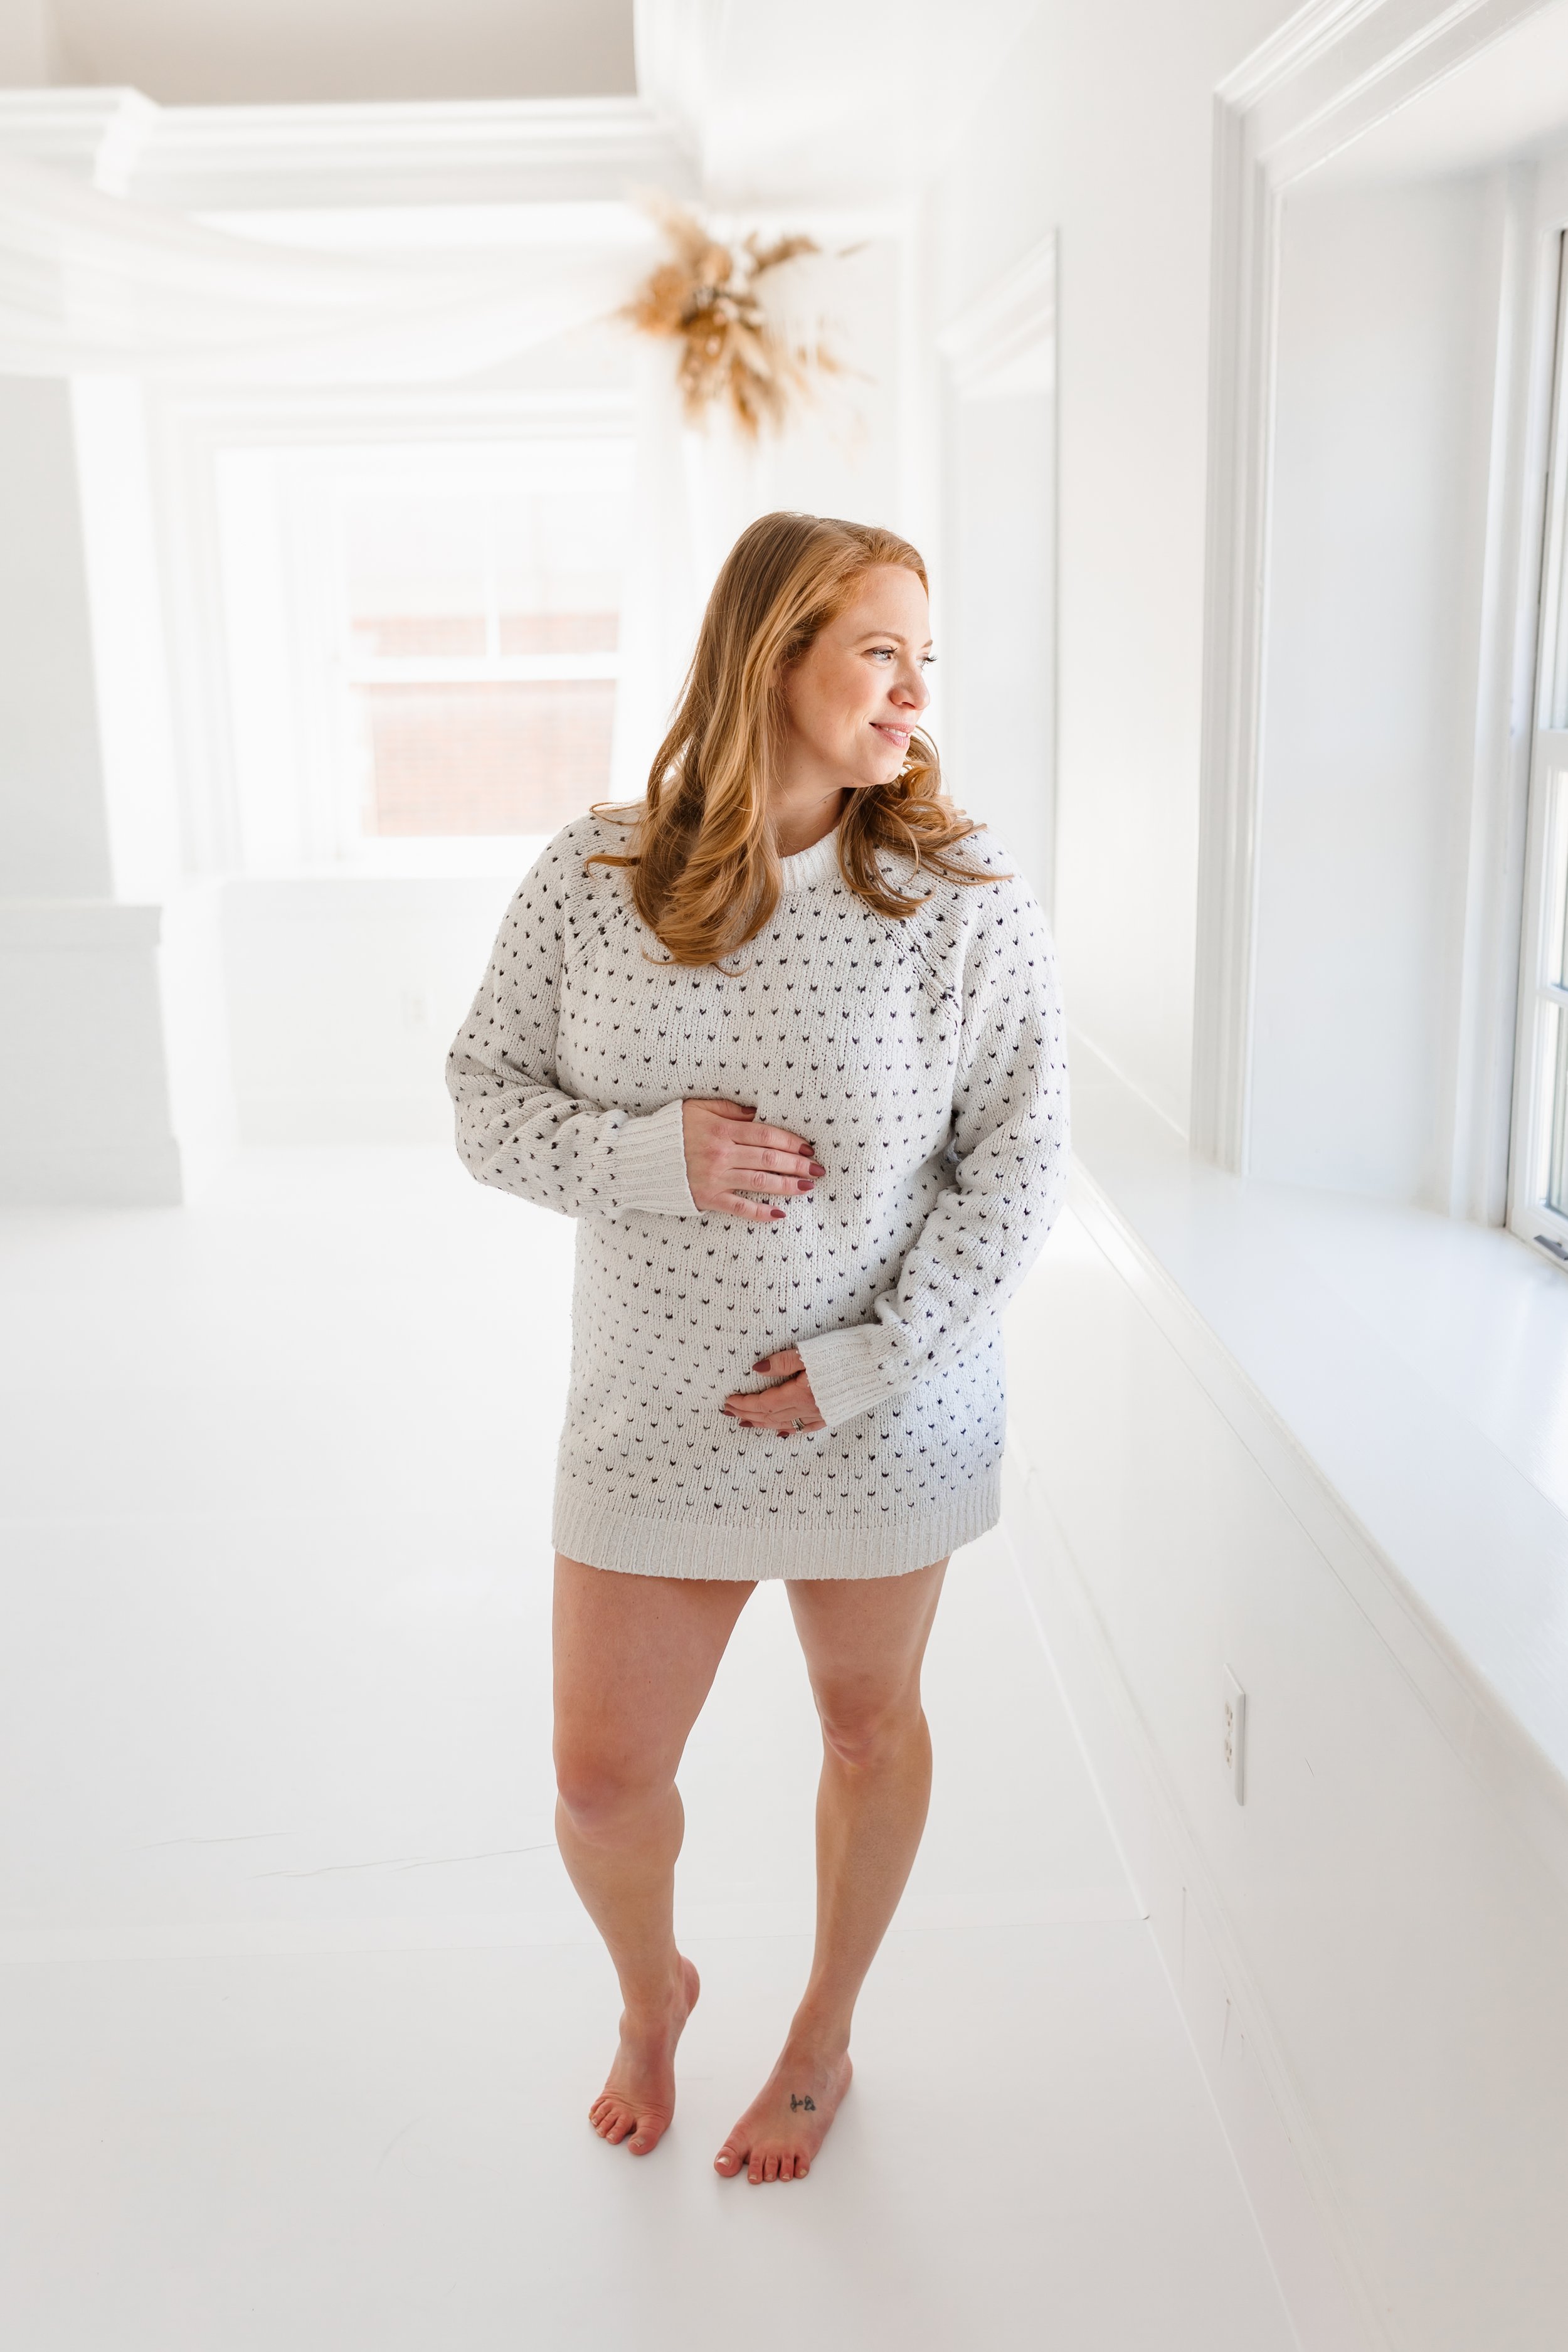 Kelly Anne Photography NH Lifestyle Photographer Studio Maternity Family Session Final Gallery-52.jpg